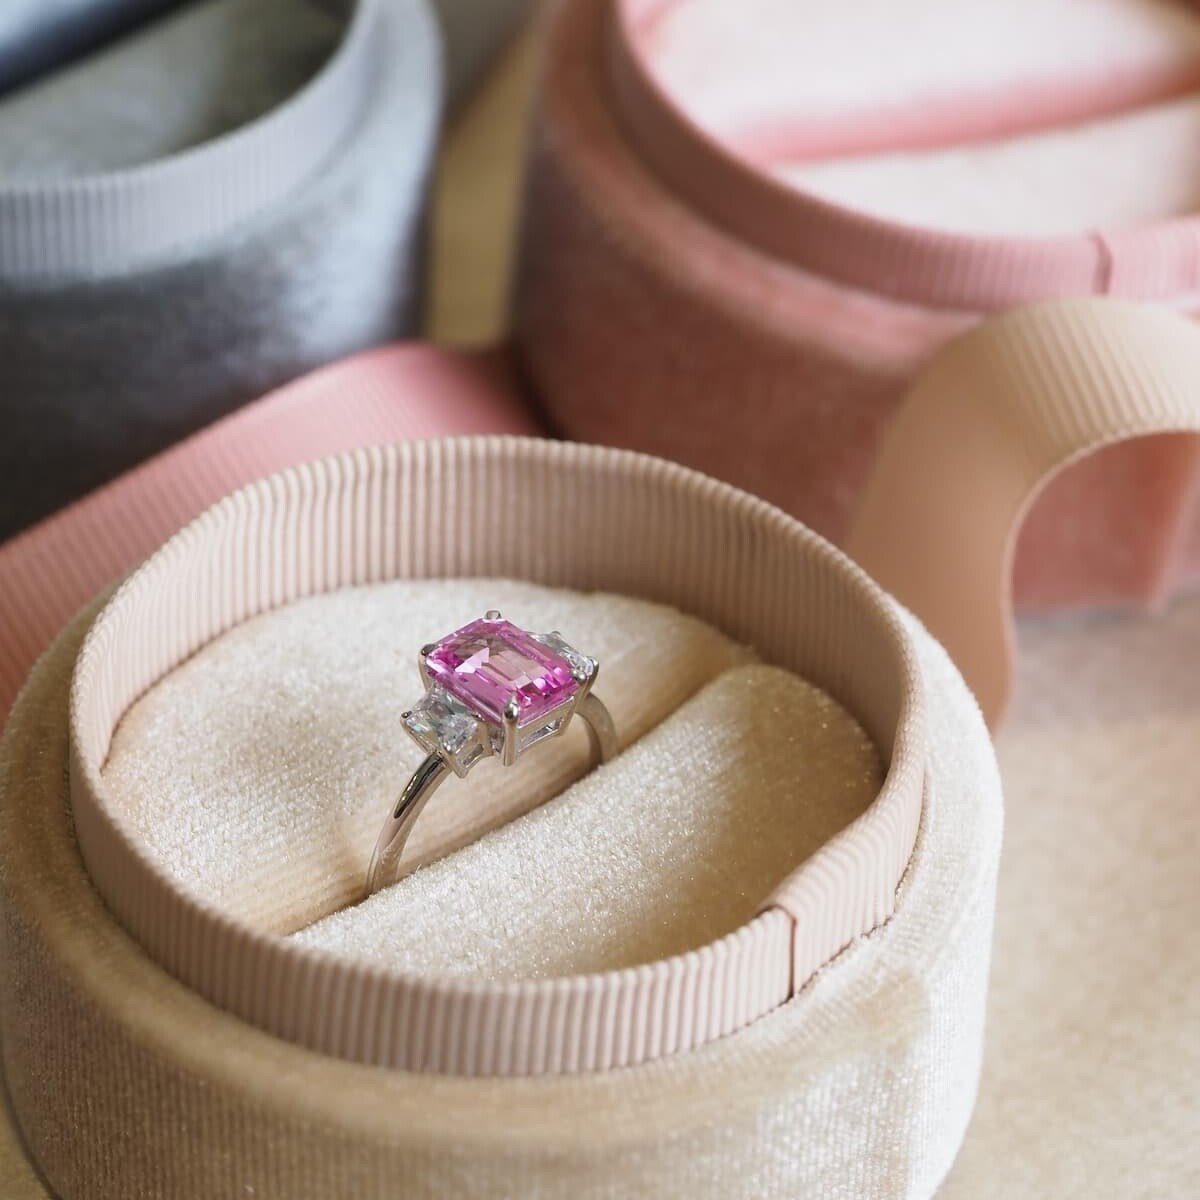 What do wedding rings and the circle of a ring symbolise?